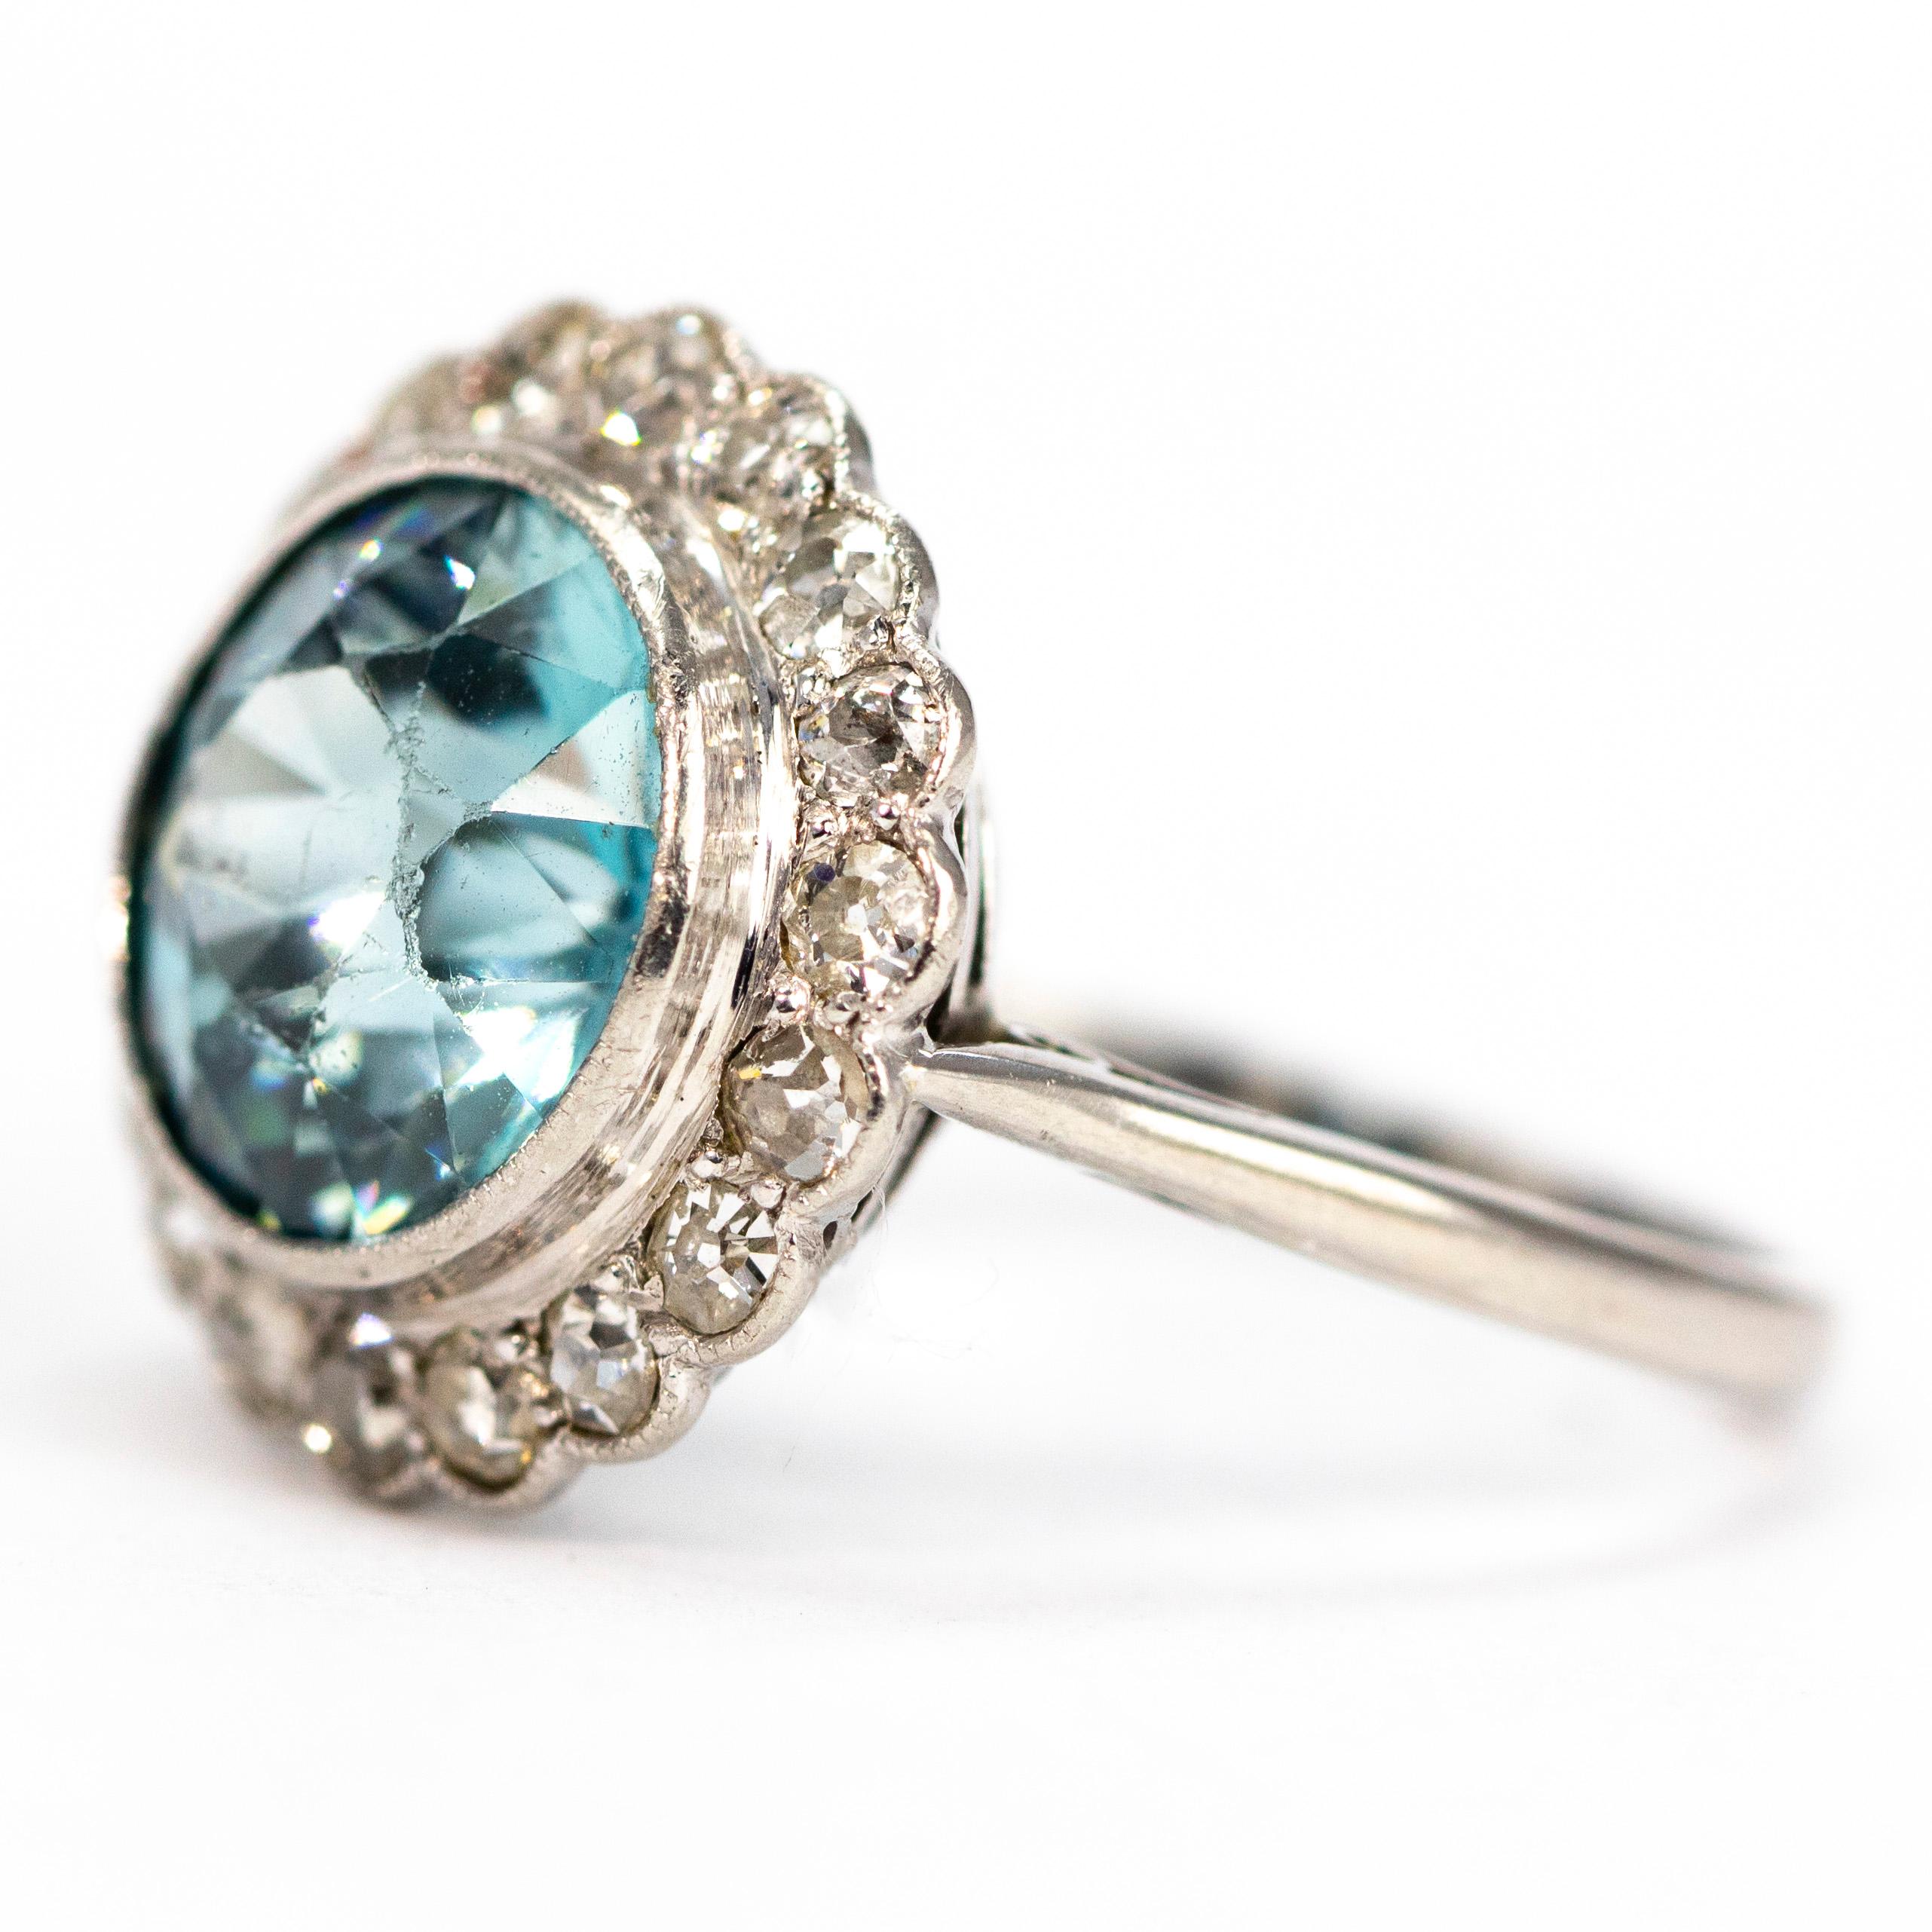 The gorgeous blue of this zircon is perfectly complimented by the halo of sparkling diamonds surrounding it. The zircon measures approximately 5carat and the diamonds measure 4pts each. 

Ring Size: N or 6 3/4 
Cluster Diameter: 16mm 

Weight: 6.05g